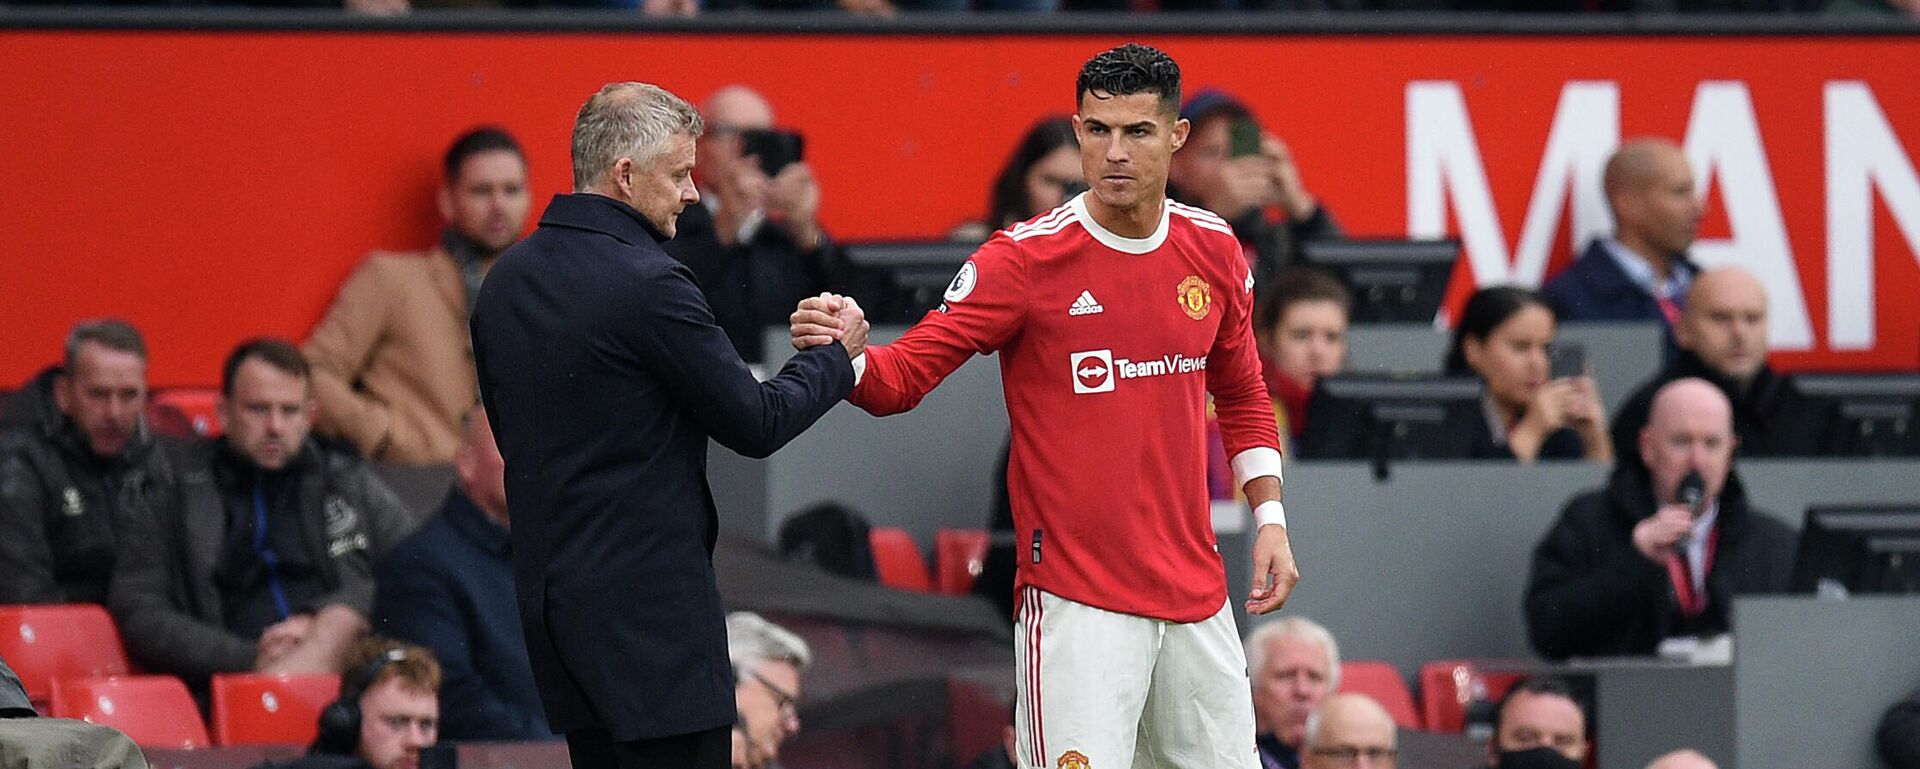 Manchester United's Norwegian manager Ole Gunnar Solskjaer (L) shakes hands with Manchester United's Portuguese striker Cristiano Ronaldo as he comes off the substitutes bench  during the English Premier League football match between Manchester United and Everton at Old Trafford in Manchester, north west England, on October 2, 2021. - Sputnik International, 1920, 22.10.2021